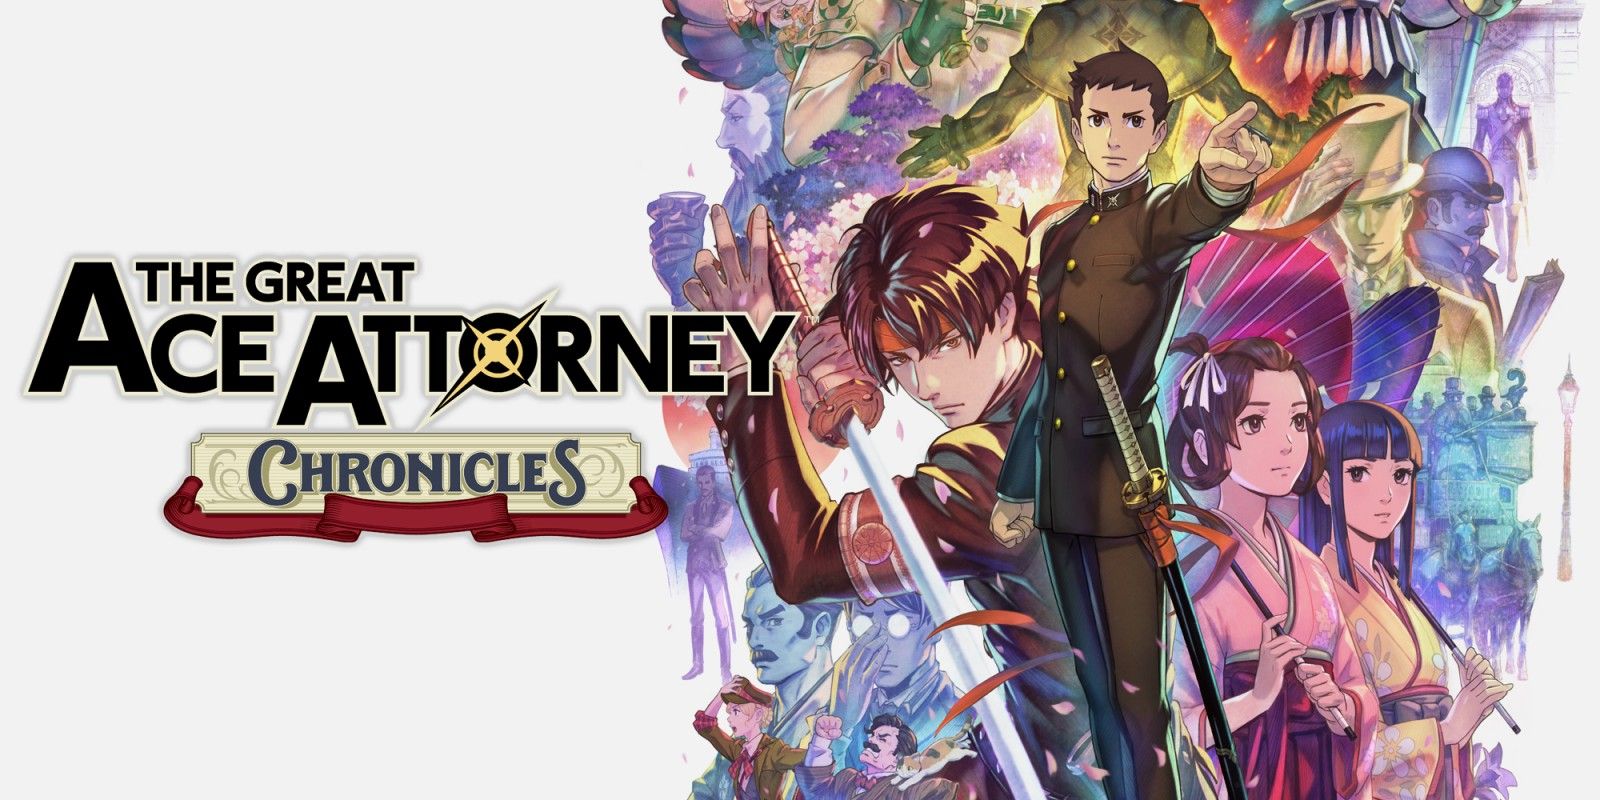 Arte chave de The Great Ace Attorney Chronicles